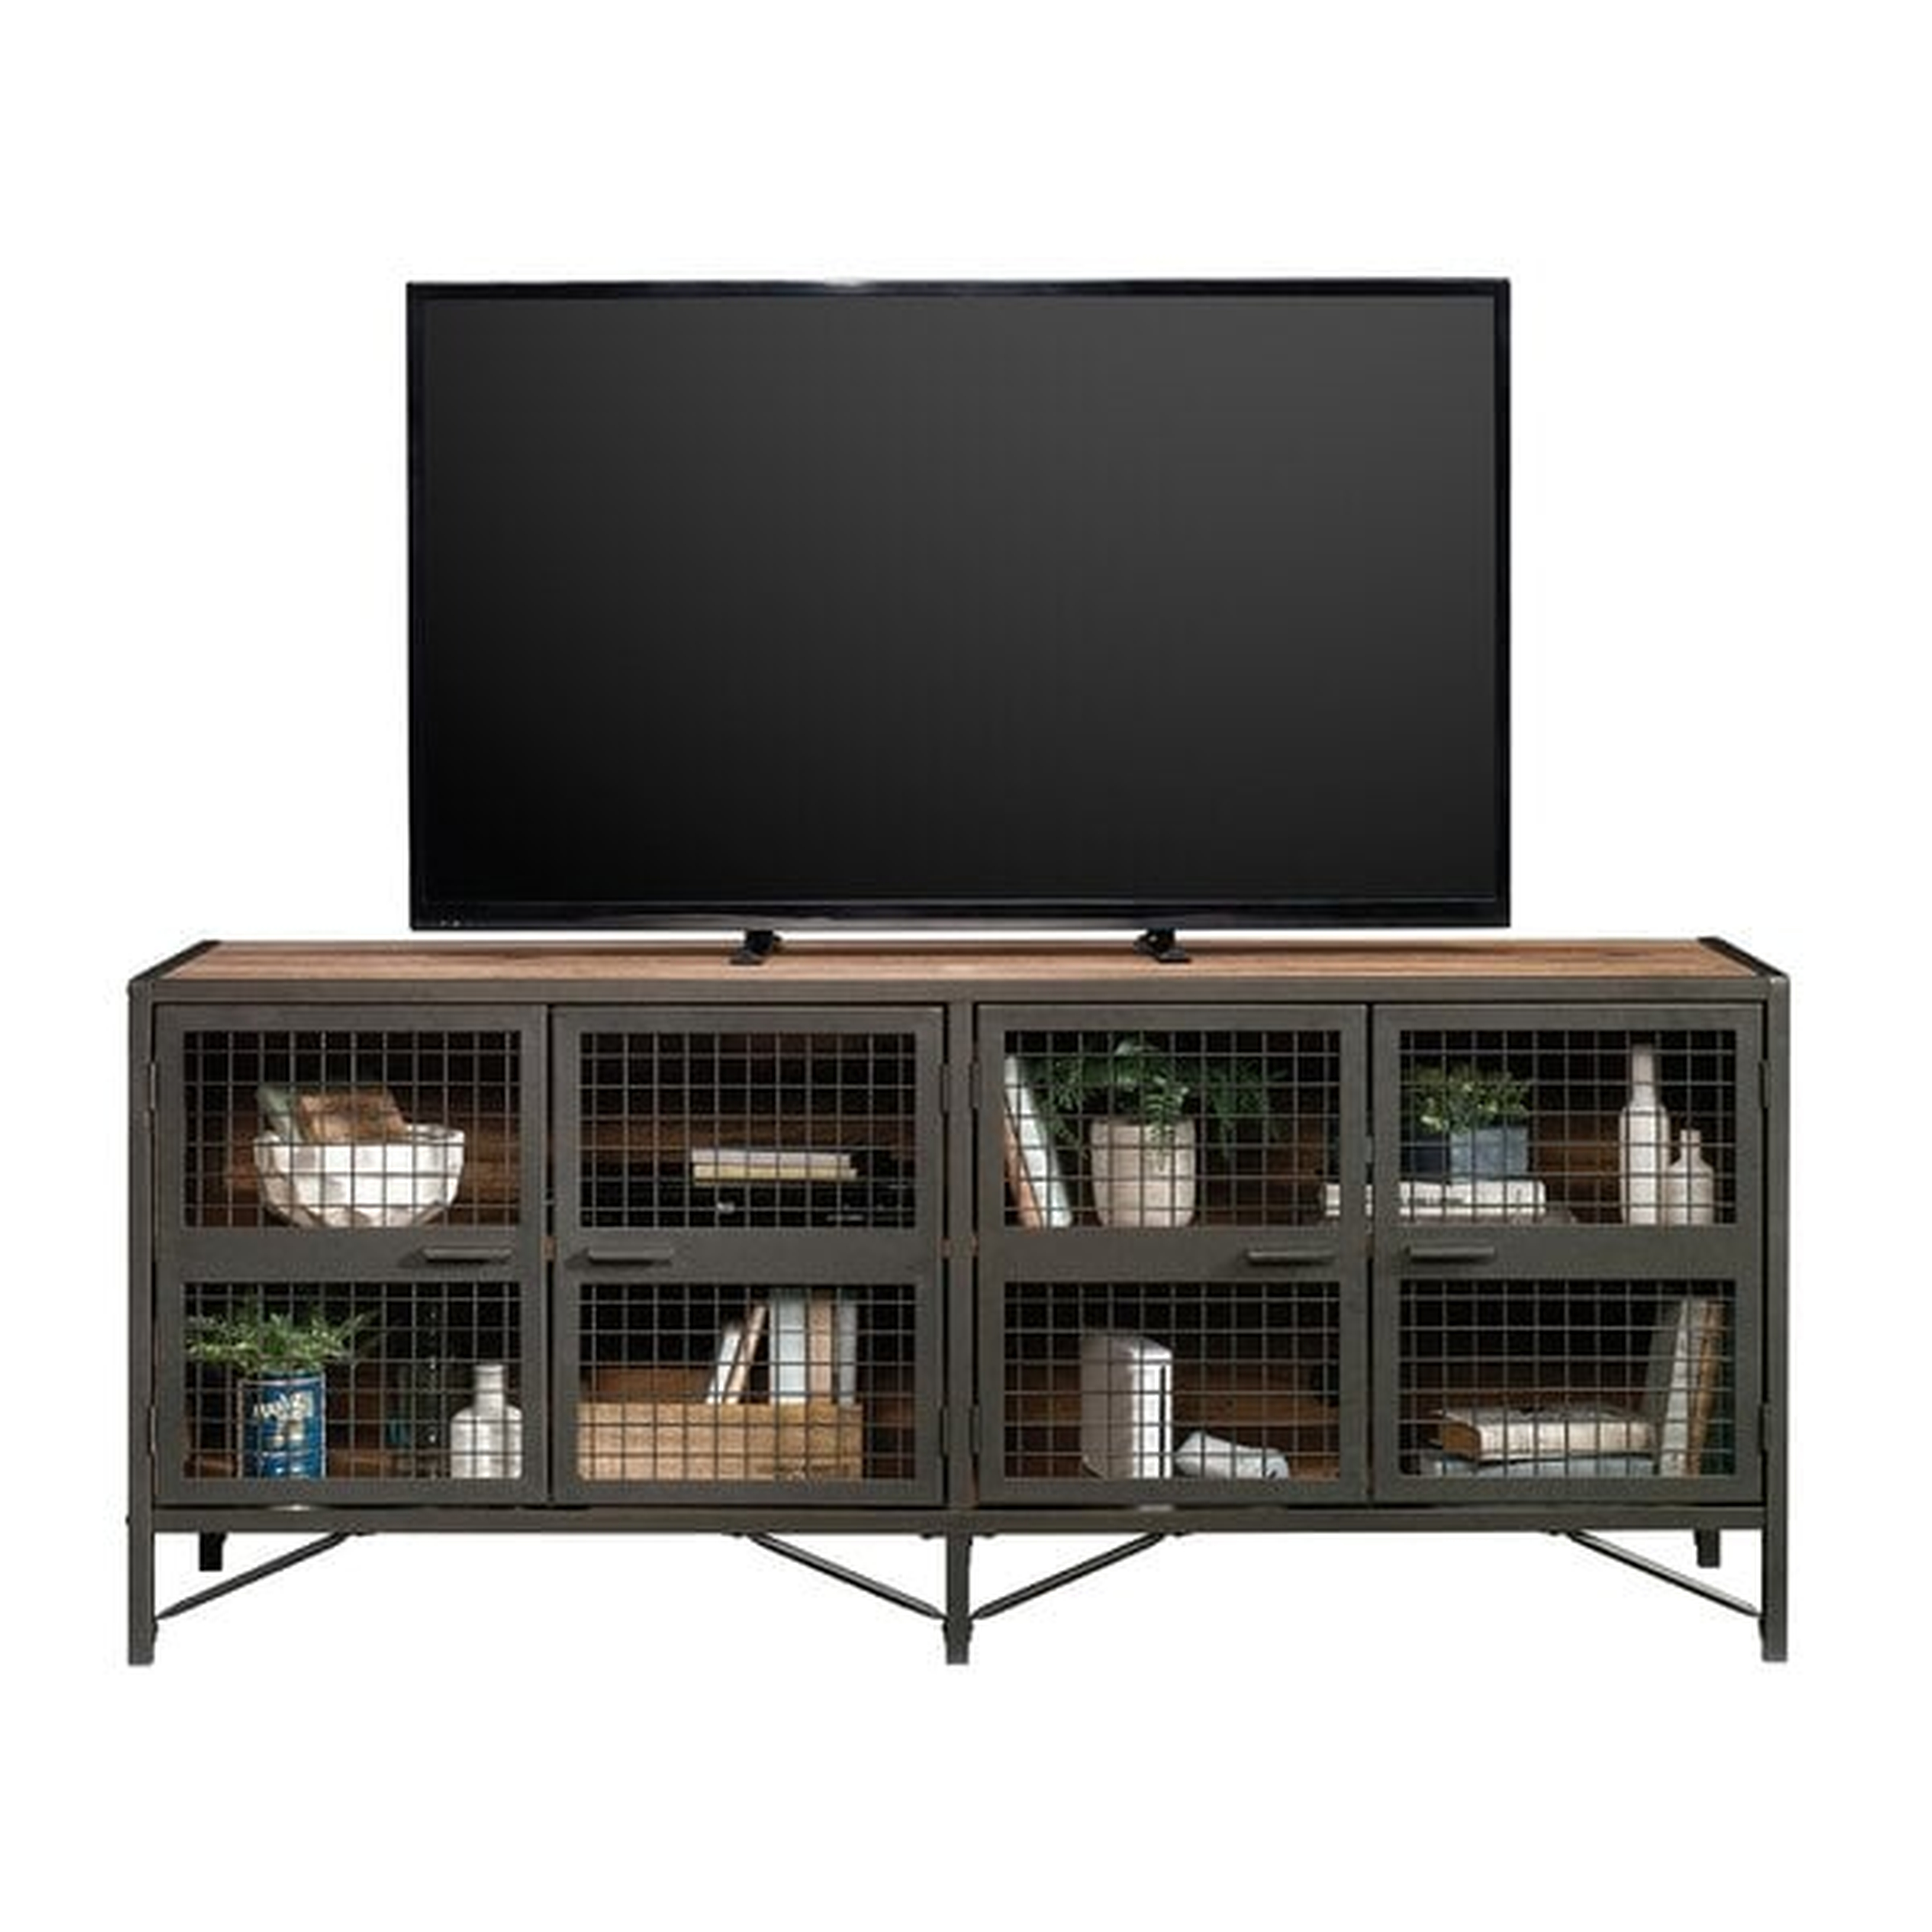 Danby TV Stand for TVs up to 70 inches - Birch Lane